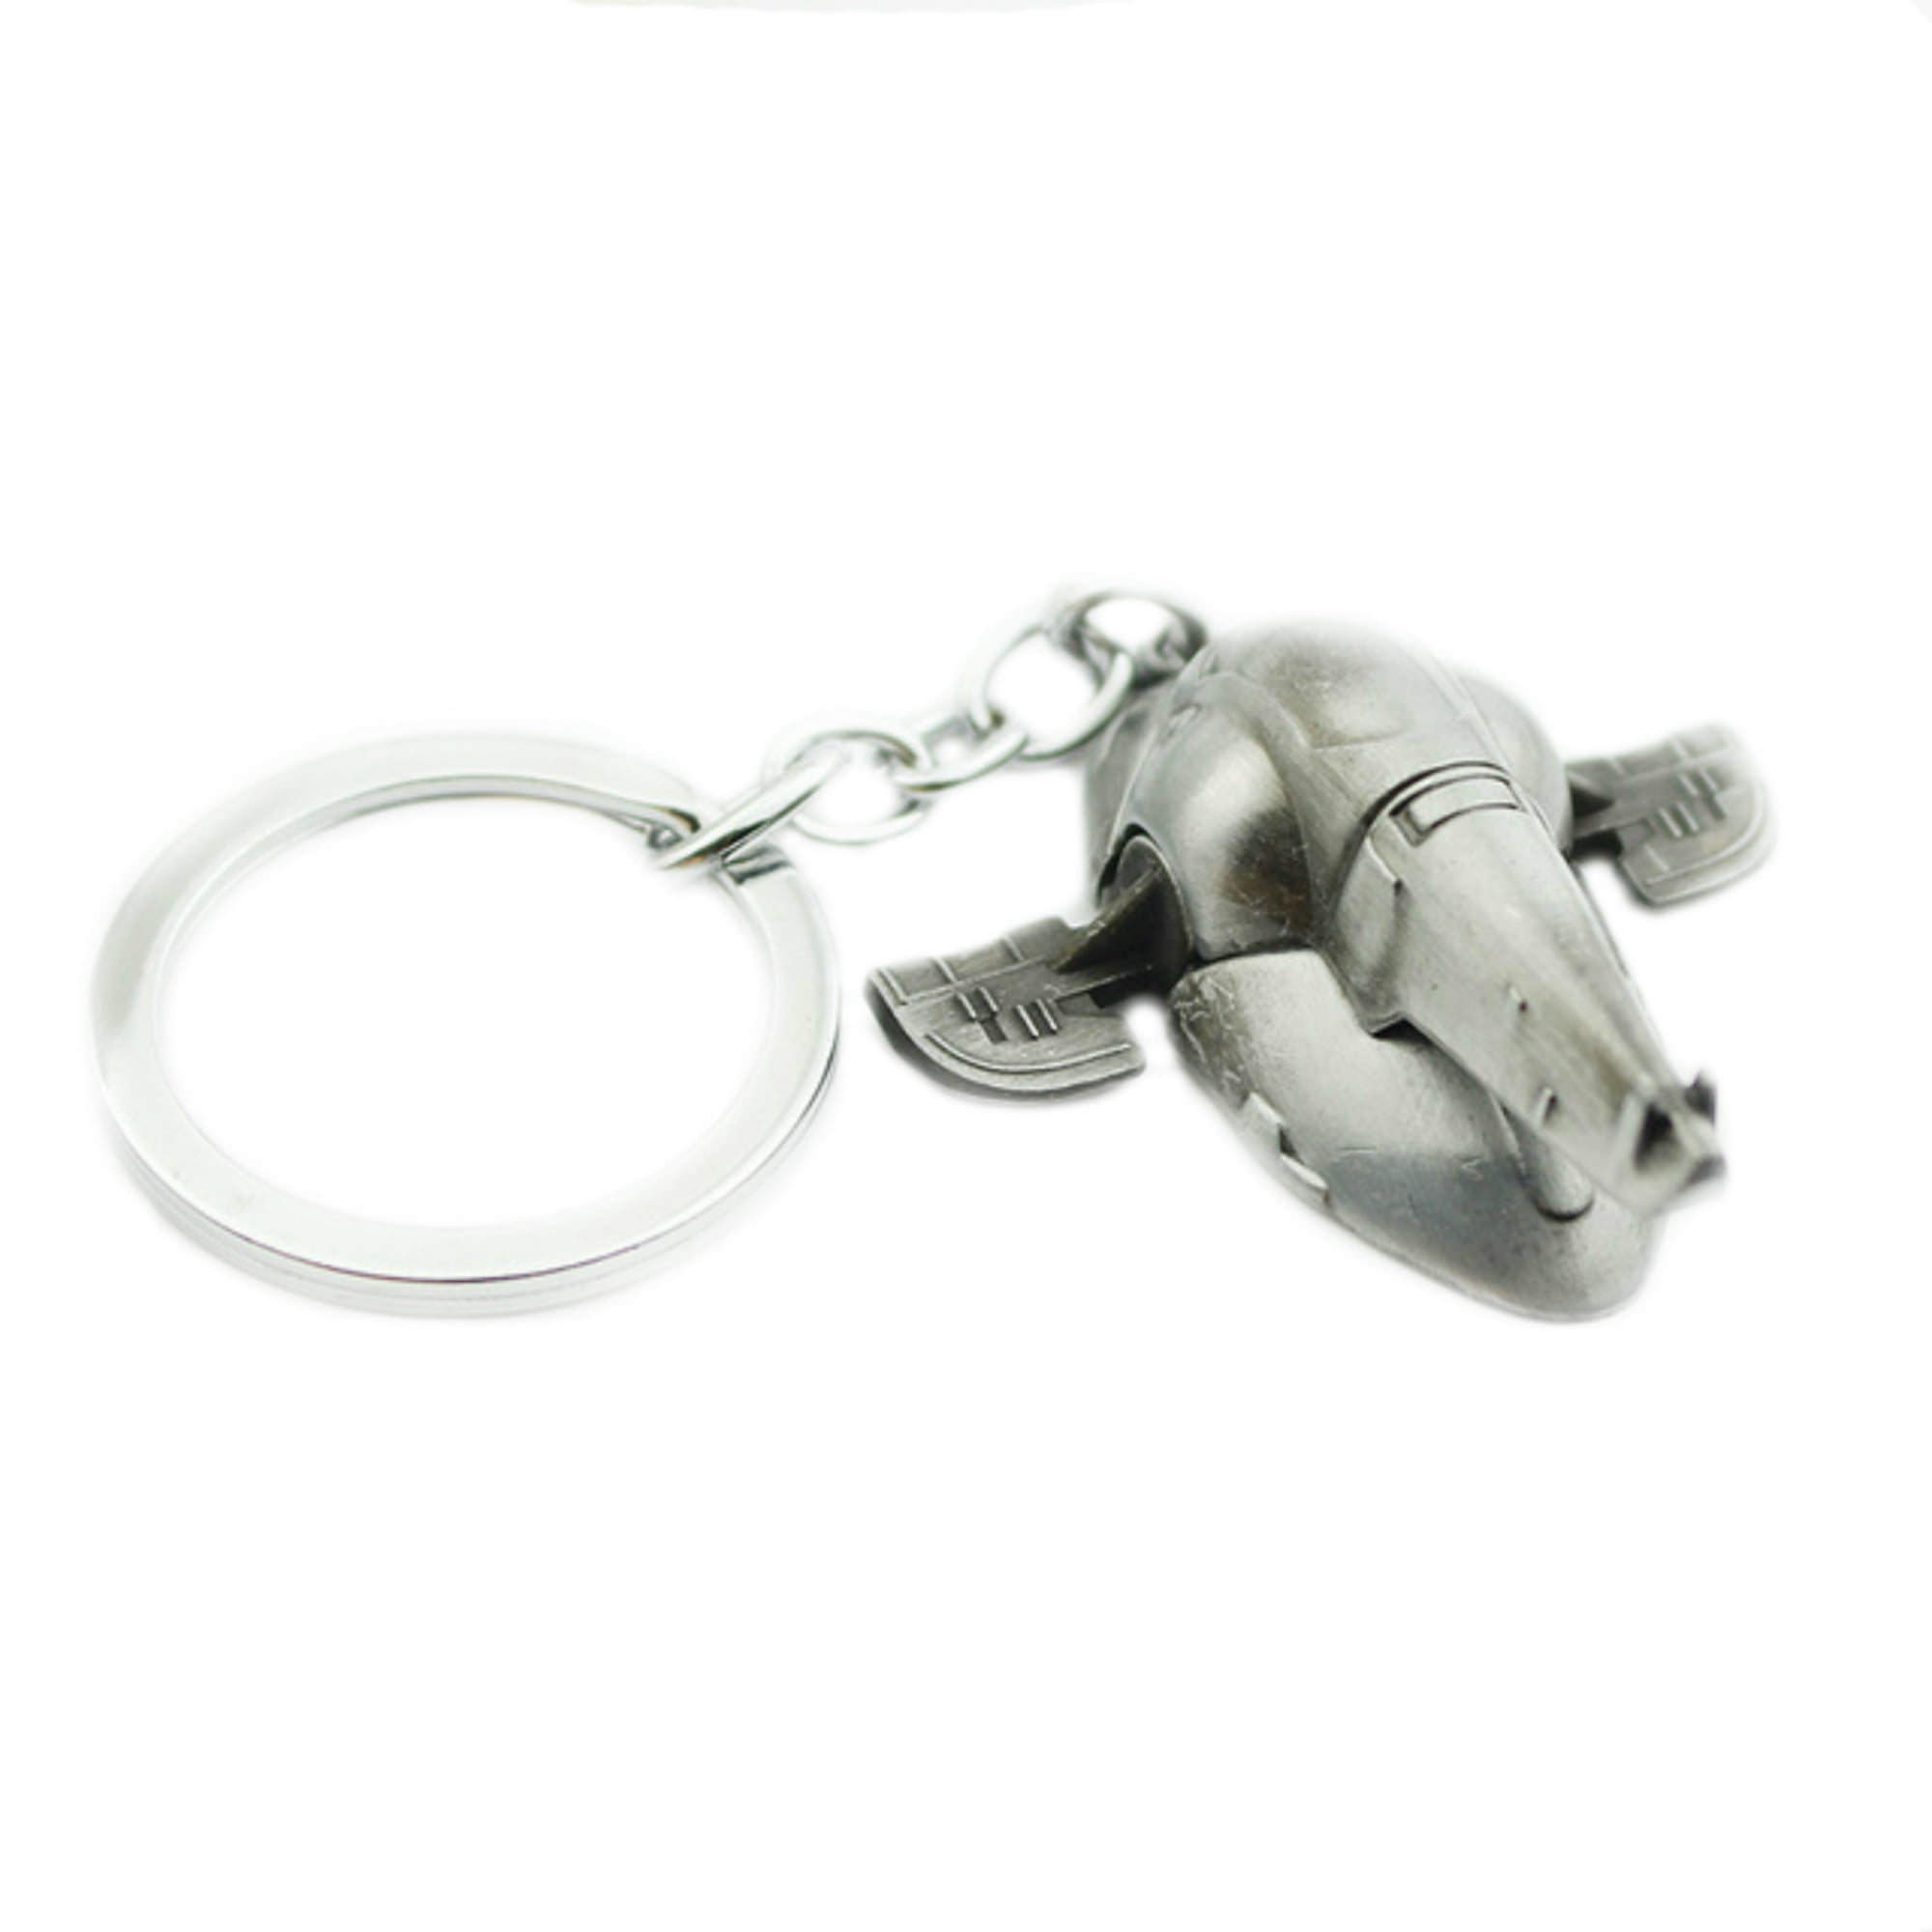 Star Wars Keychain Metal Rebellion Home Car Ring Silver Gift Idea TIE FIGHTER 